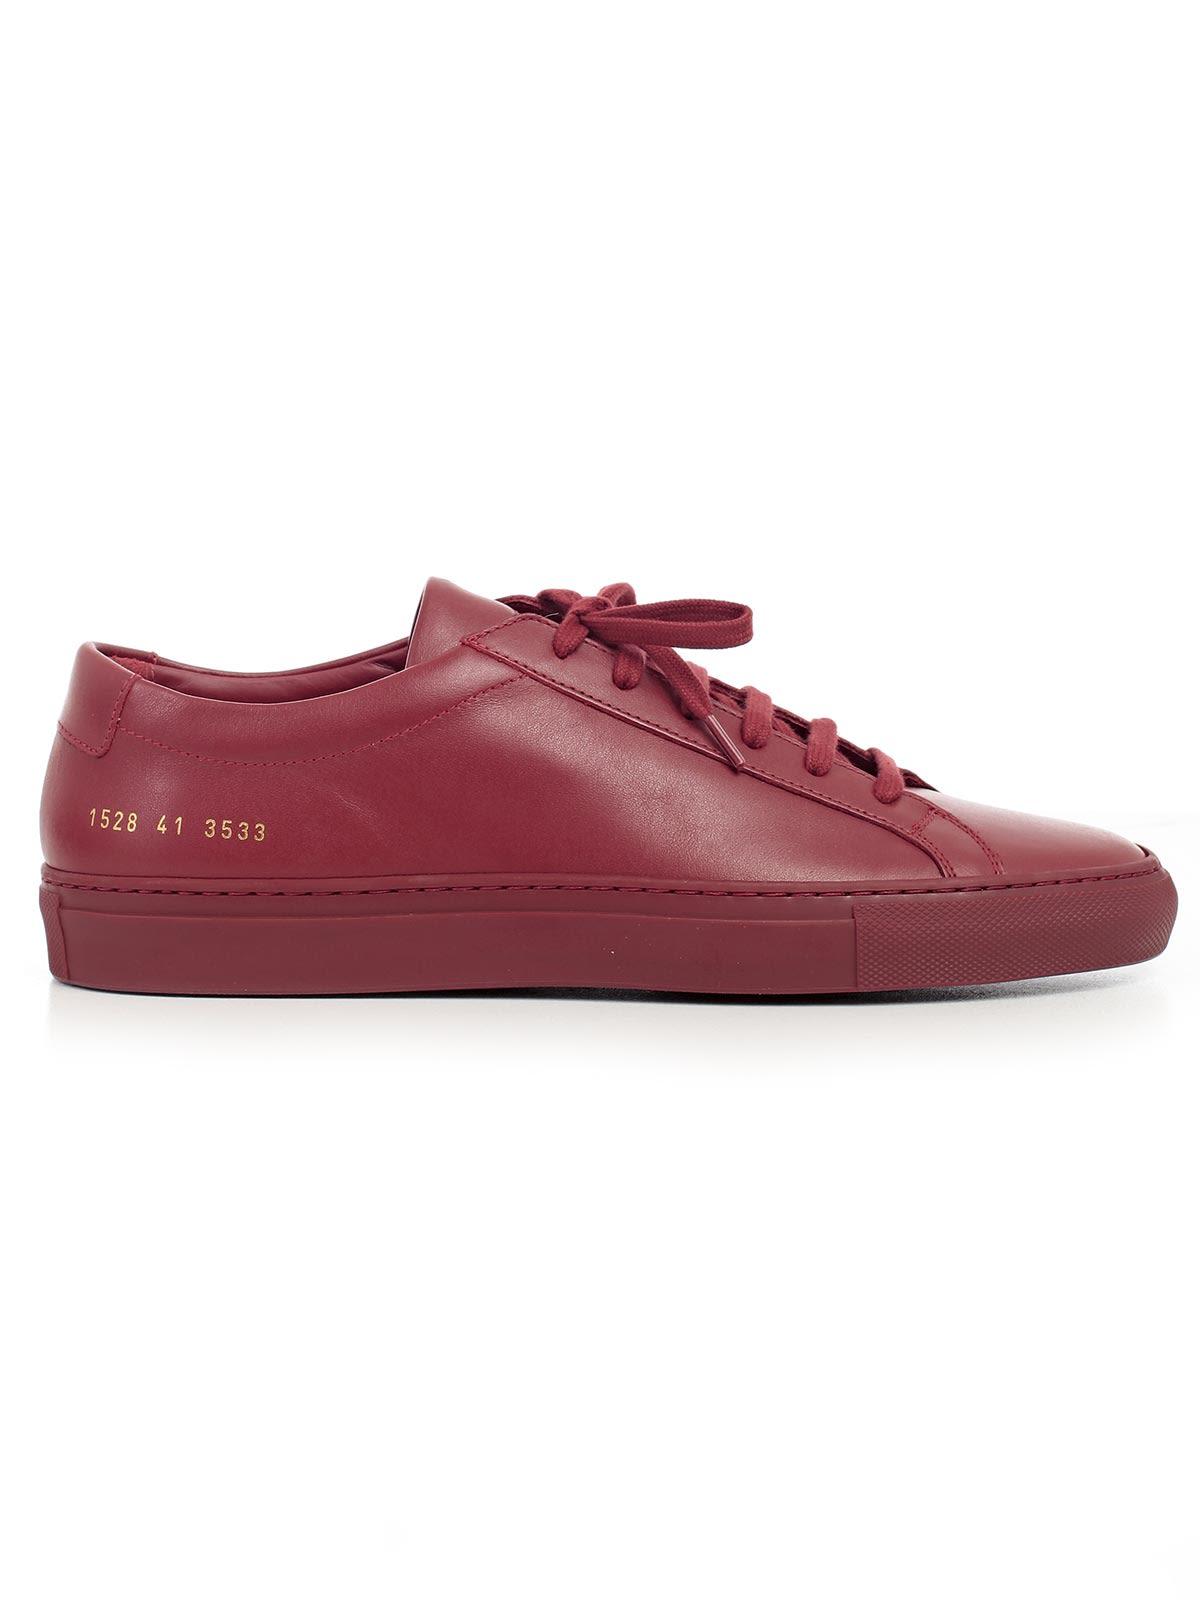 Common Projects 1528 Original Achilles Low Sneakers In Red | ModeSens